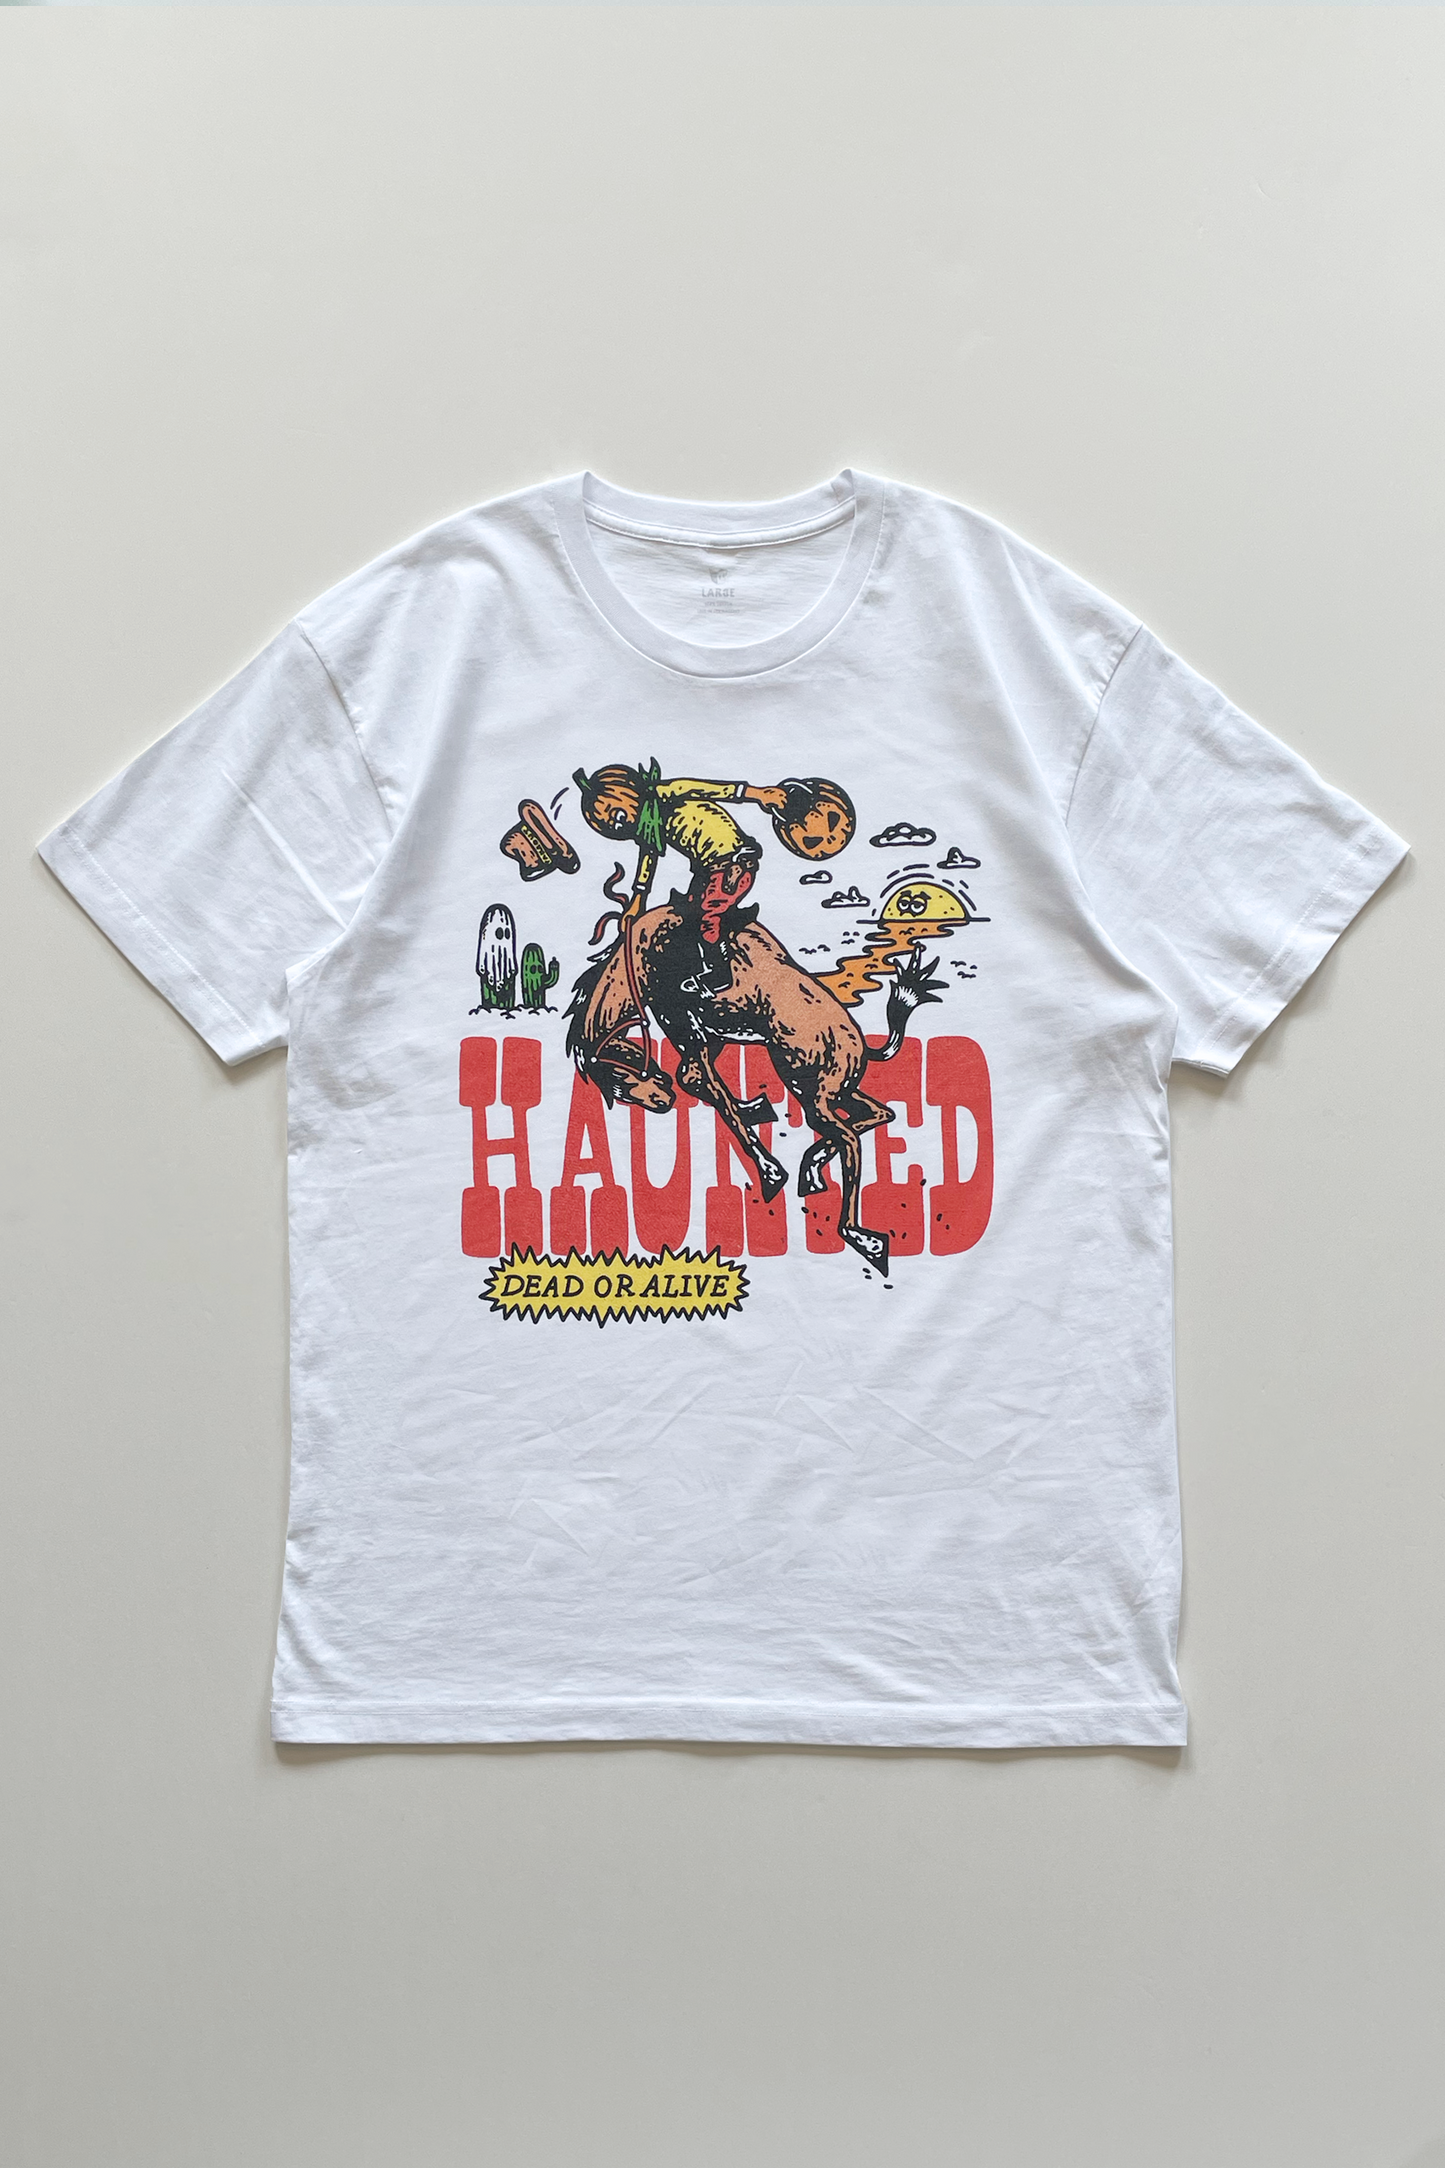 Haunted Dead or Alive T-shirt